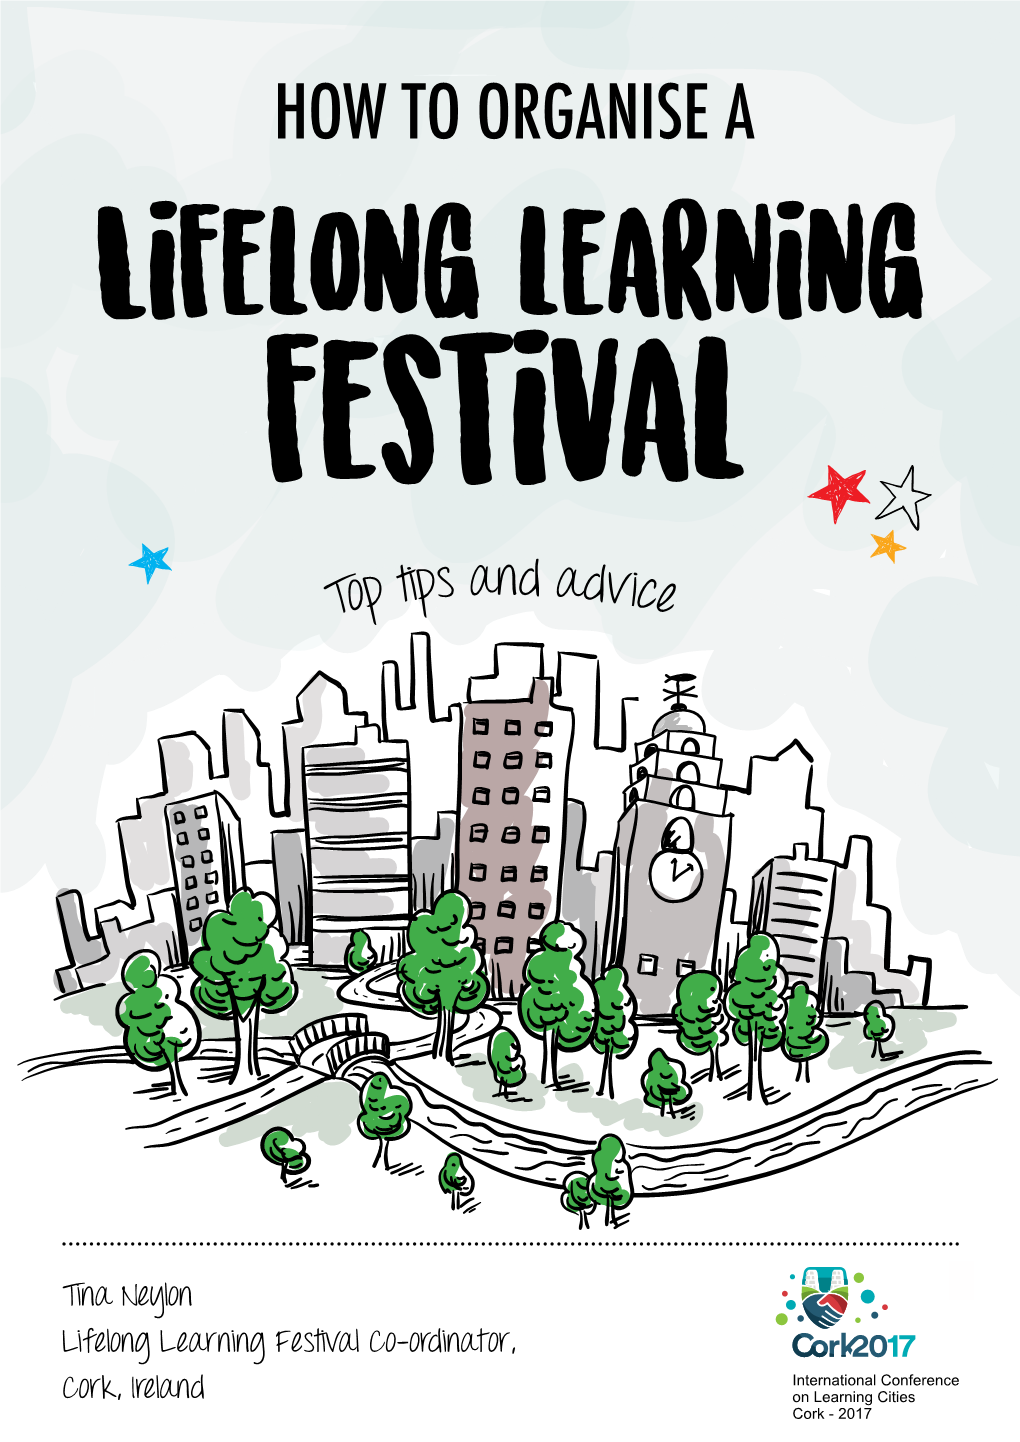 HOW to ORGANISE a Lifelong Learning Festival